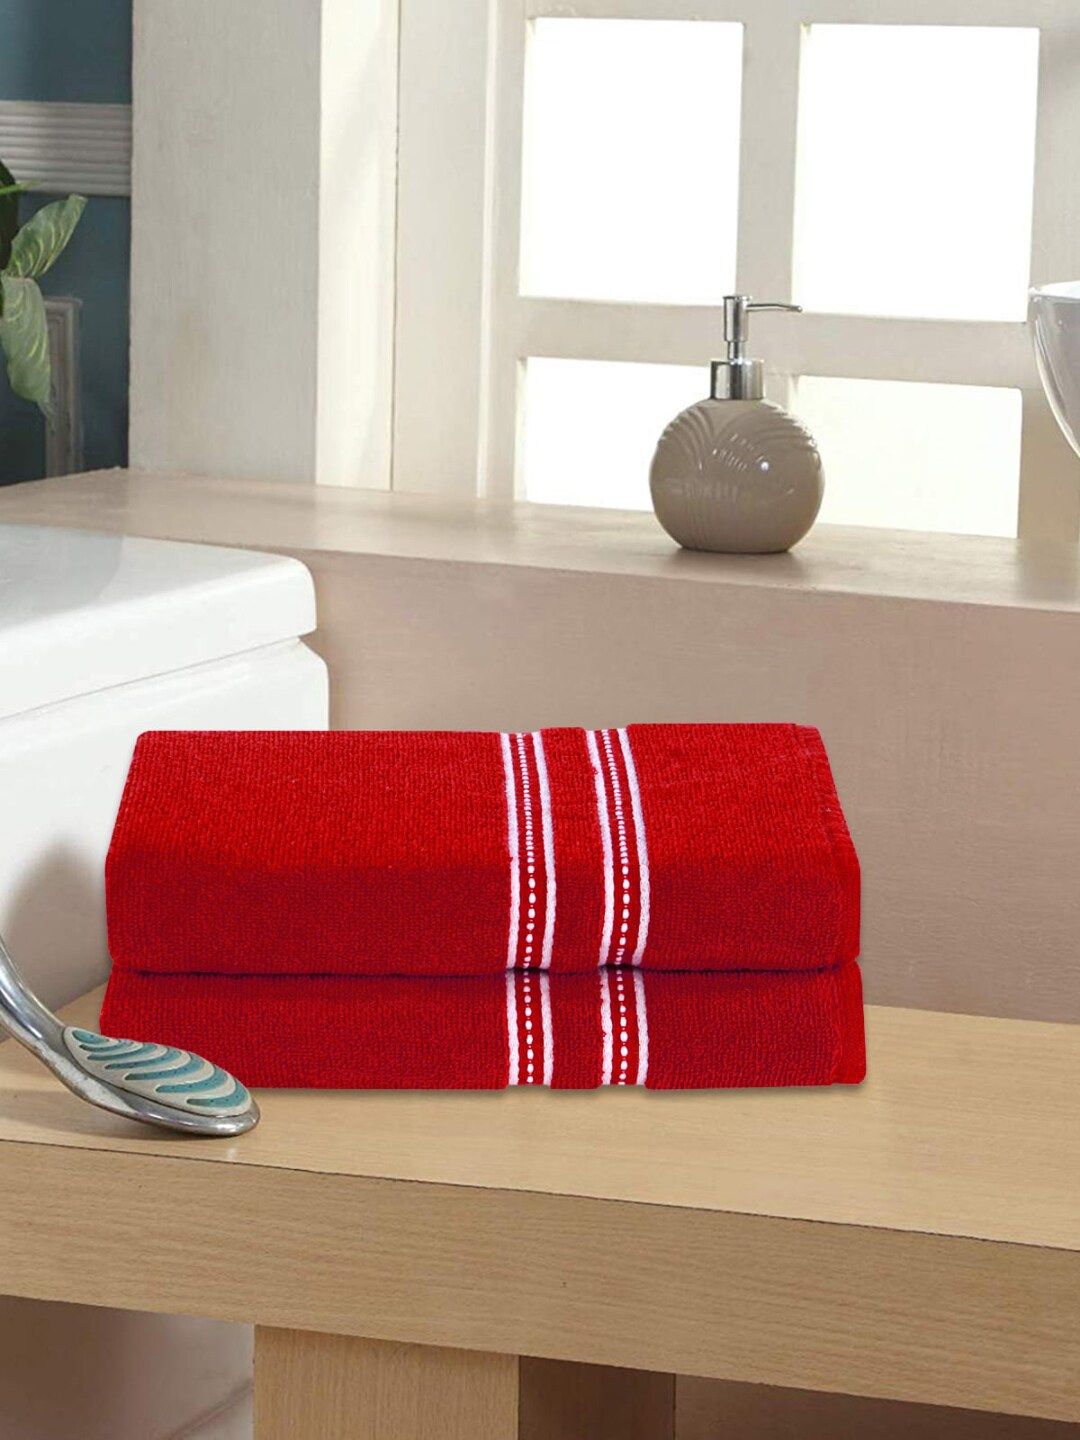 ROMEE Unisex Set of 2 Solid 500 GSM Large Bath Towels Price in India